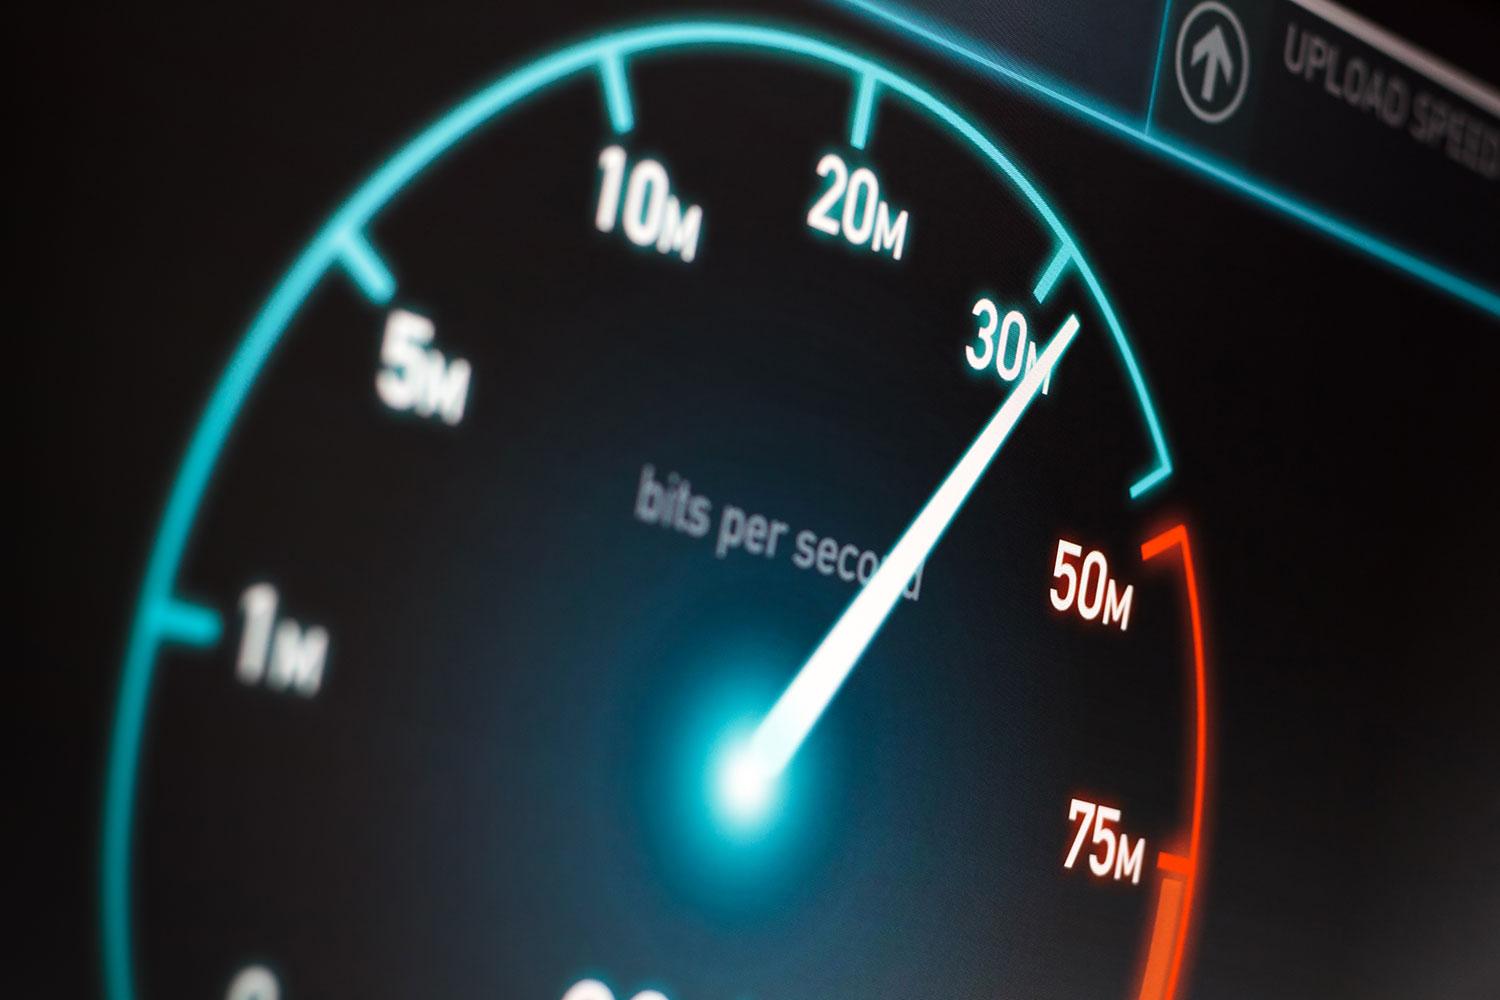 The UK government might be claiming that more than 90 per cent of the UK population is able to access superfast broadband speeds, but the truth is, most of the users cannot even access speed over 24 Mbps.